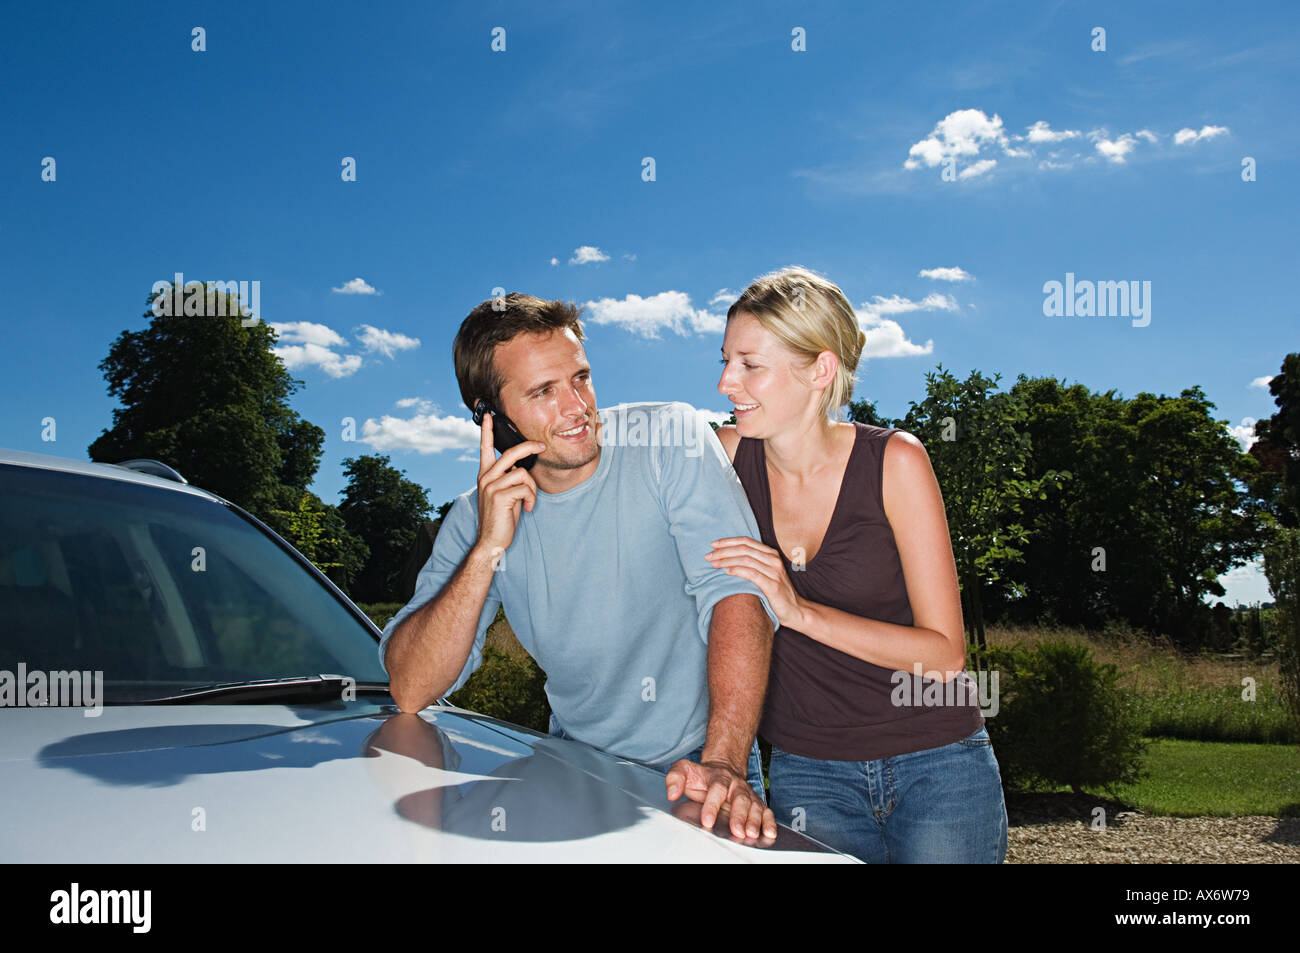 Couple by car using mobile phone Stock Photo